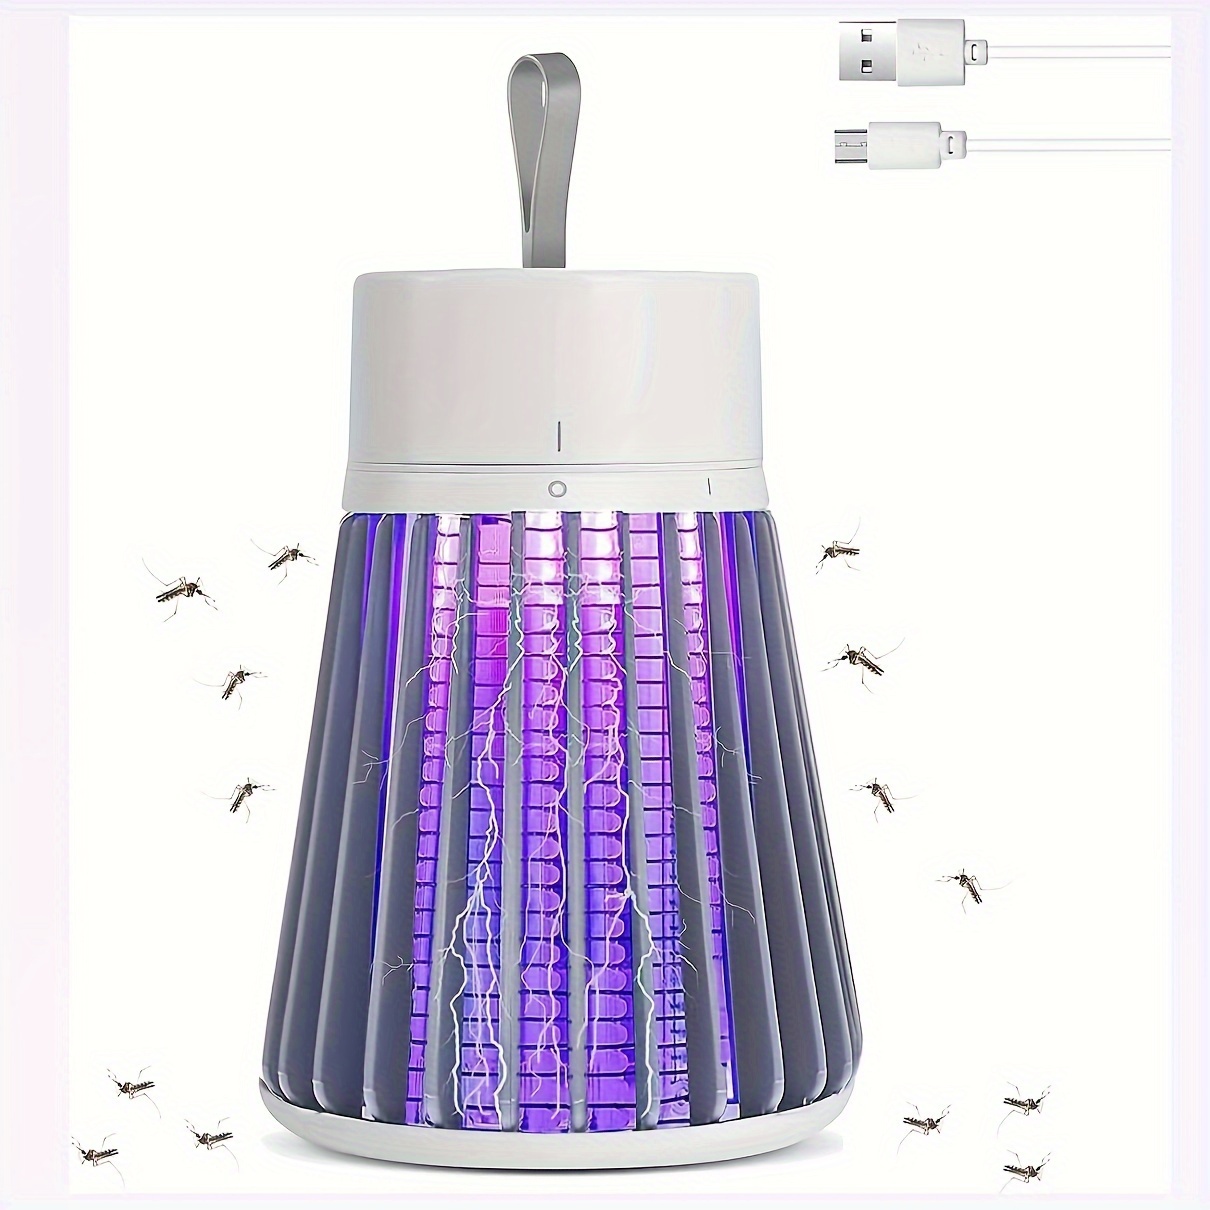 

Rechargeable Portable Mosquito Trap - Efficient Uv Attraction, Security Grid, Indoor Outdoor Bug Zapper, Electric Fly Killer With Usb Charging - Insect Control For Home And Garden